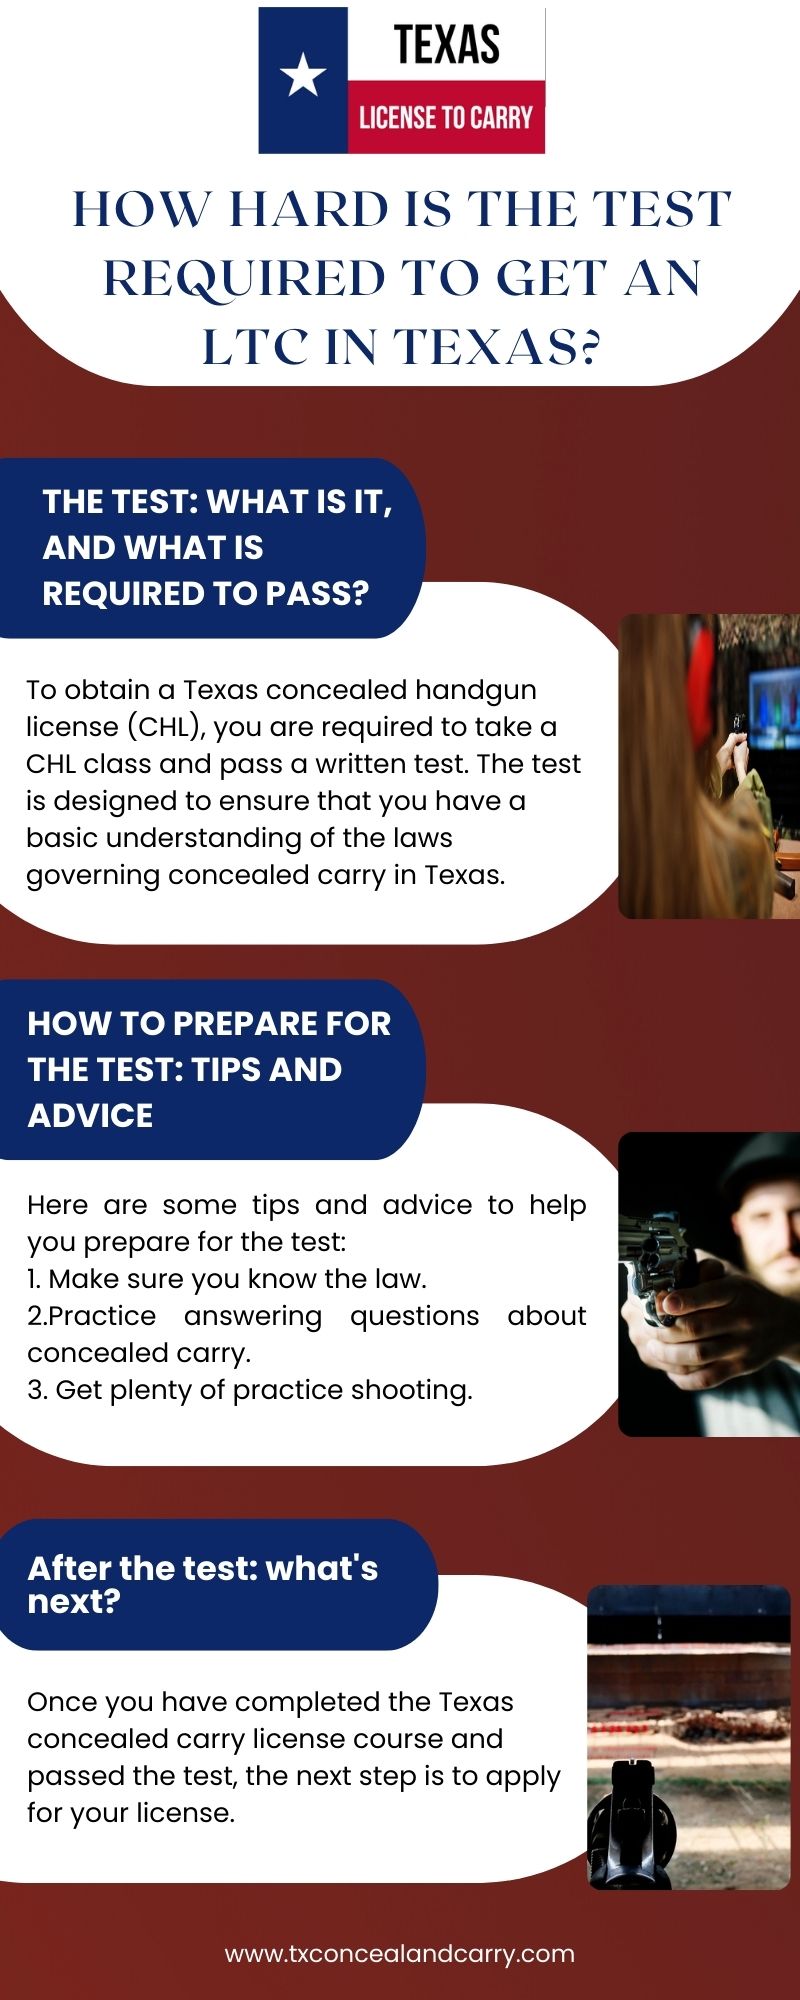 How Hard Is the Test Required to Get an LTC in Texas?